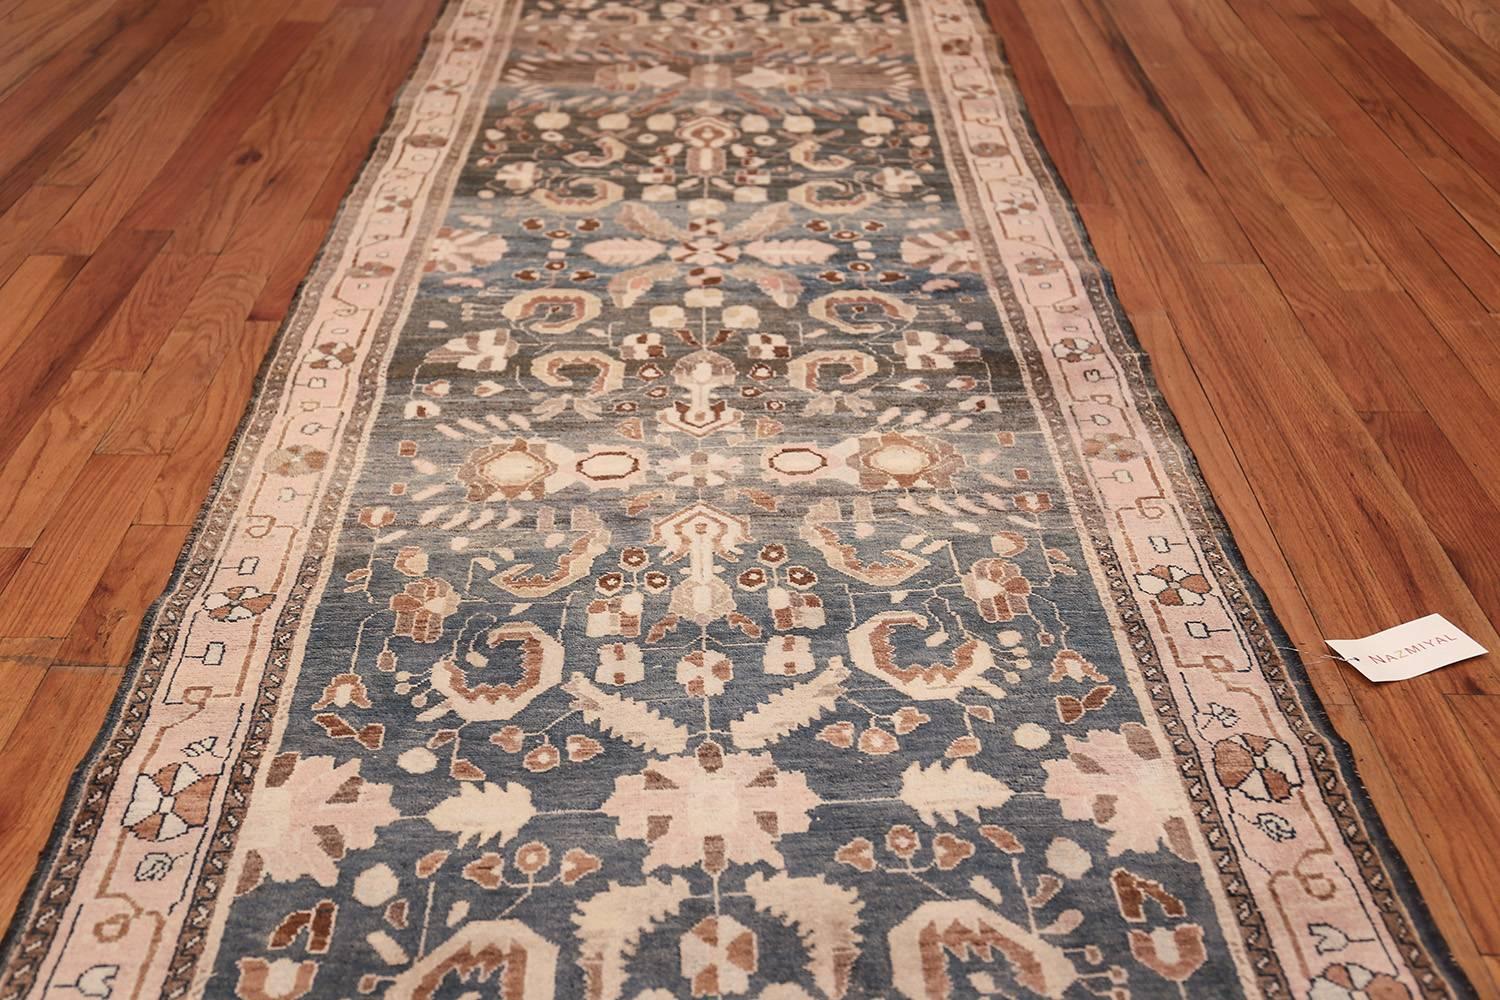 Wool Antique Khorassan Persian Runner Rug. Size: 3 ft 6 in x 12 ft 10 in 